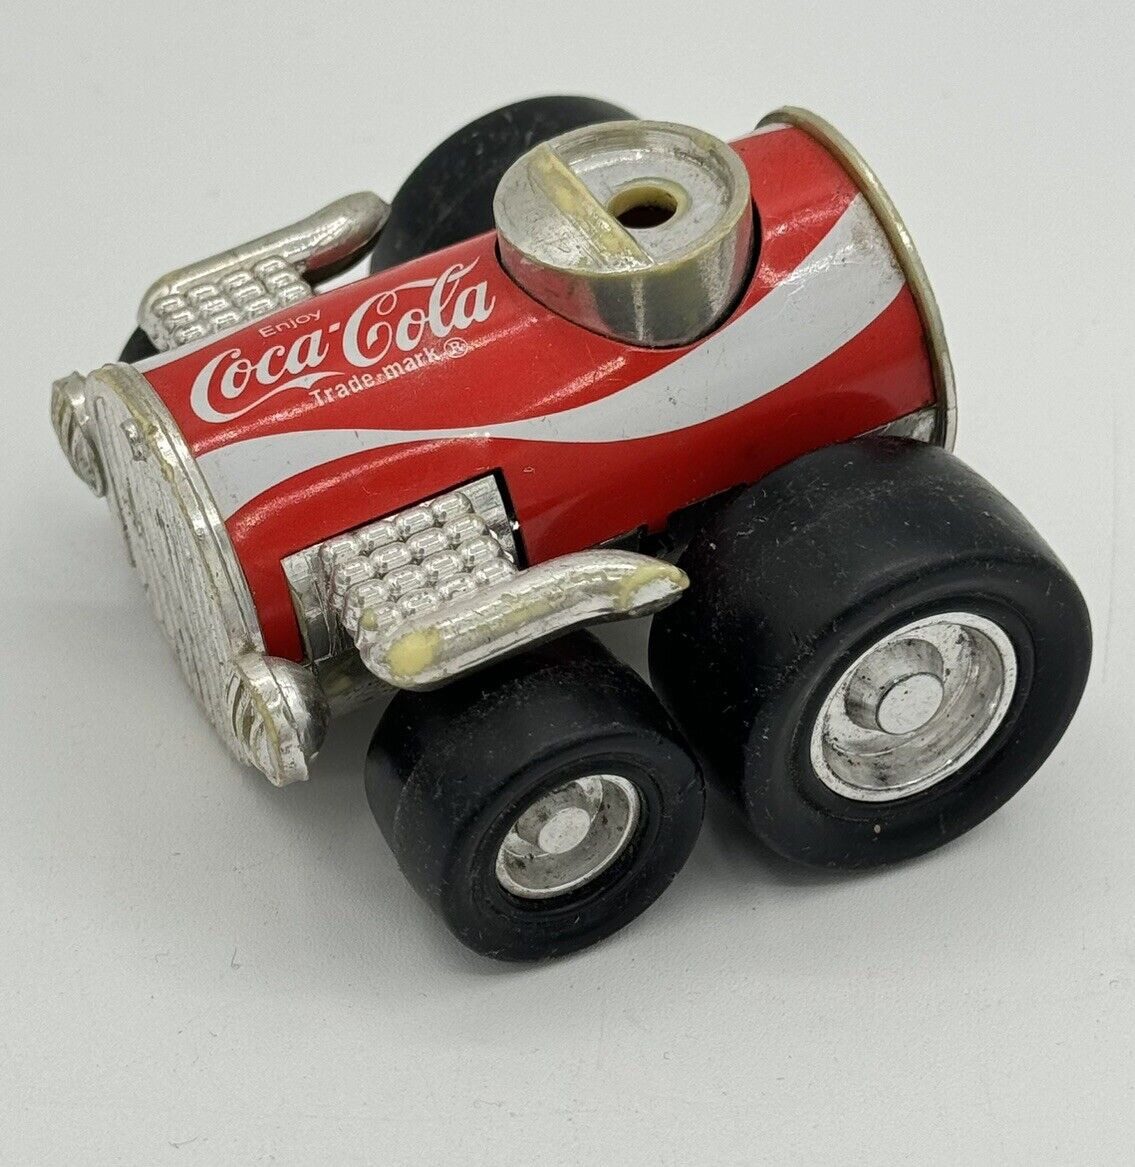 Buddy L Coca Cola Pop Art Buggy Vintage Item In Good Condition Made In Japan